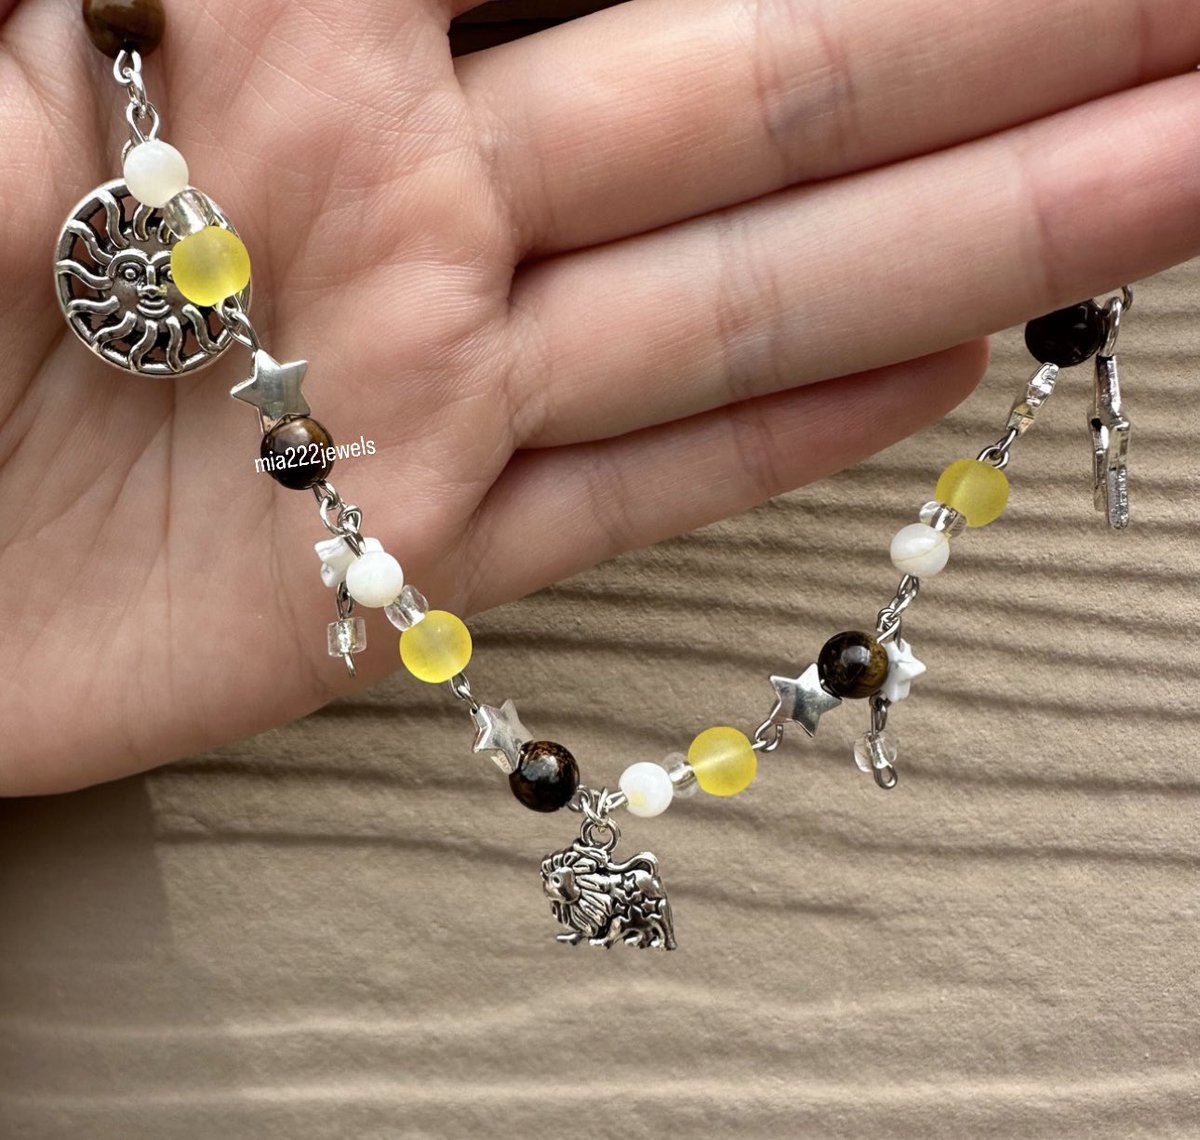 ✦ im doing an astrology bracelet series, so i have to be biased and start with leo! ✦

✦ 7 $ ✦

#leo #astrology #astrologyjewelry #jewelrymaking #delicatejewelry #costar